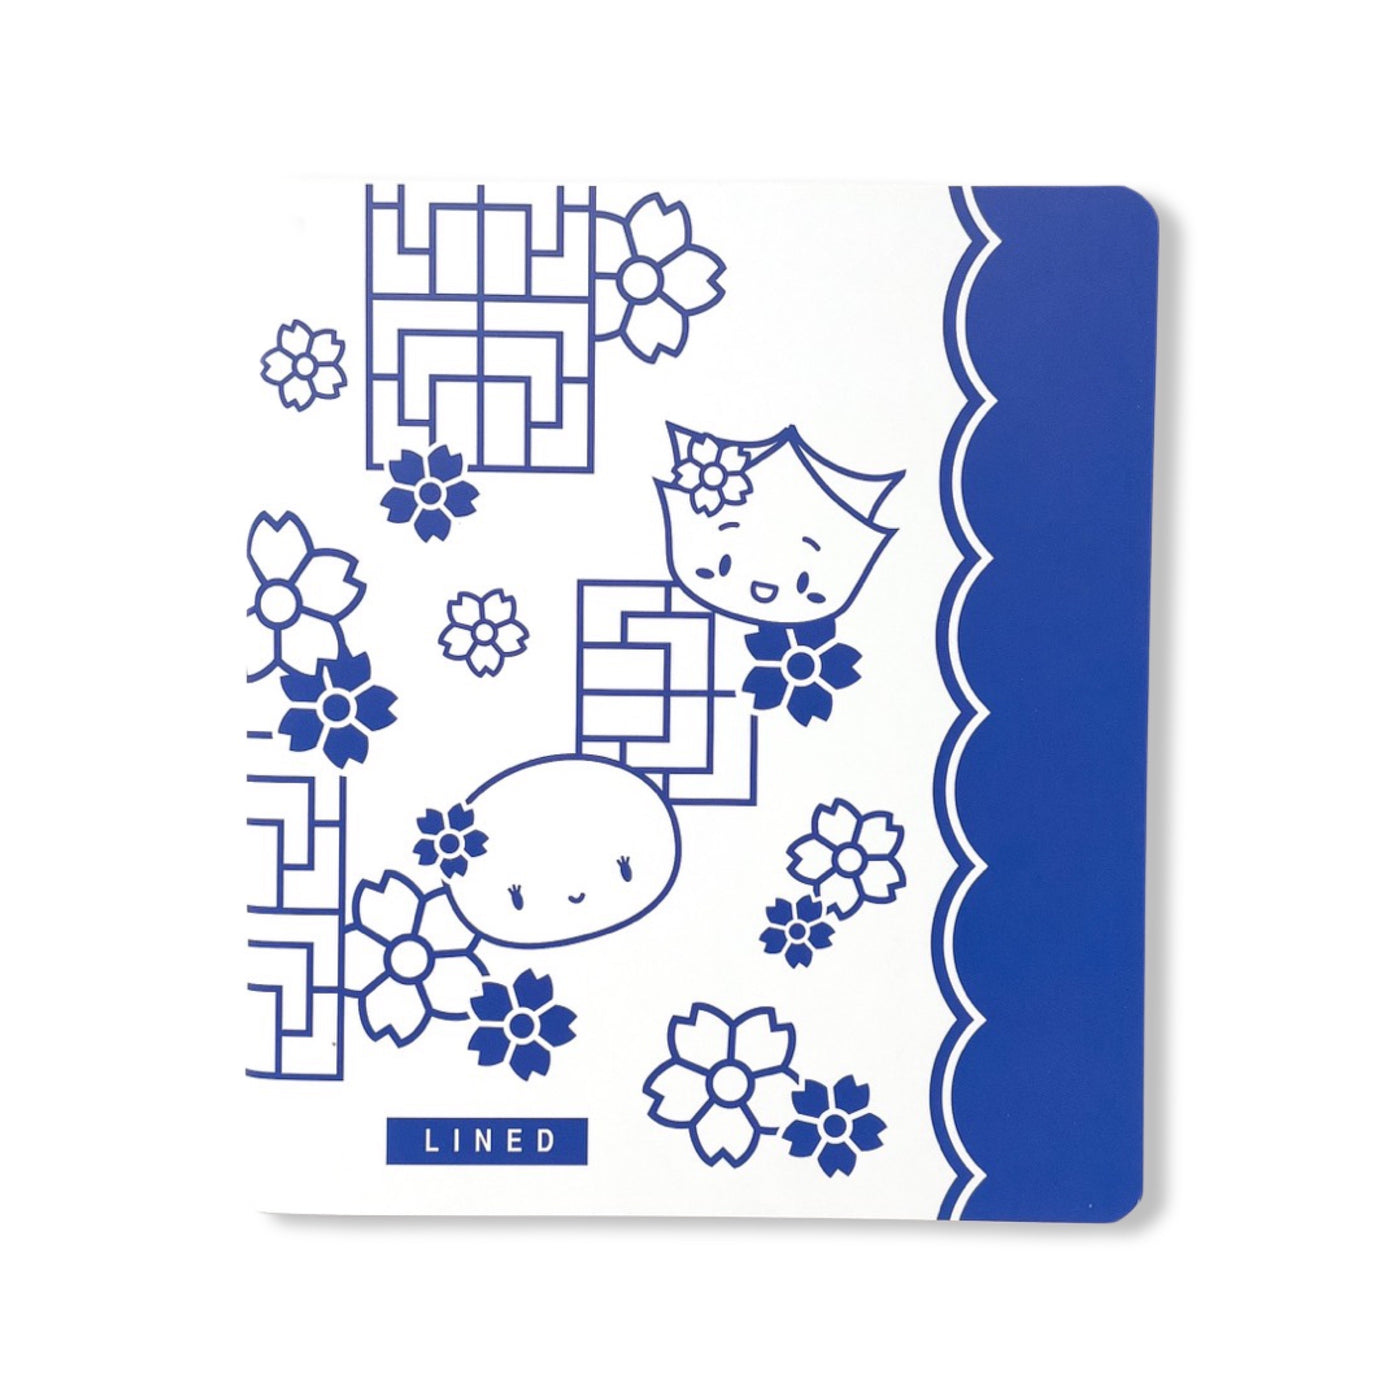 N084 | Porcelain - Lined Notebook (A5W)